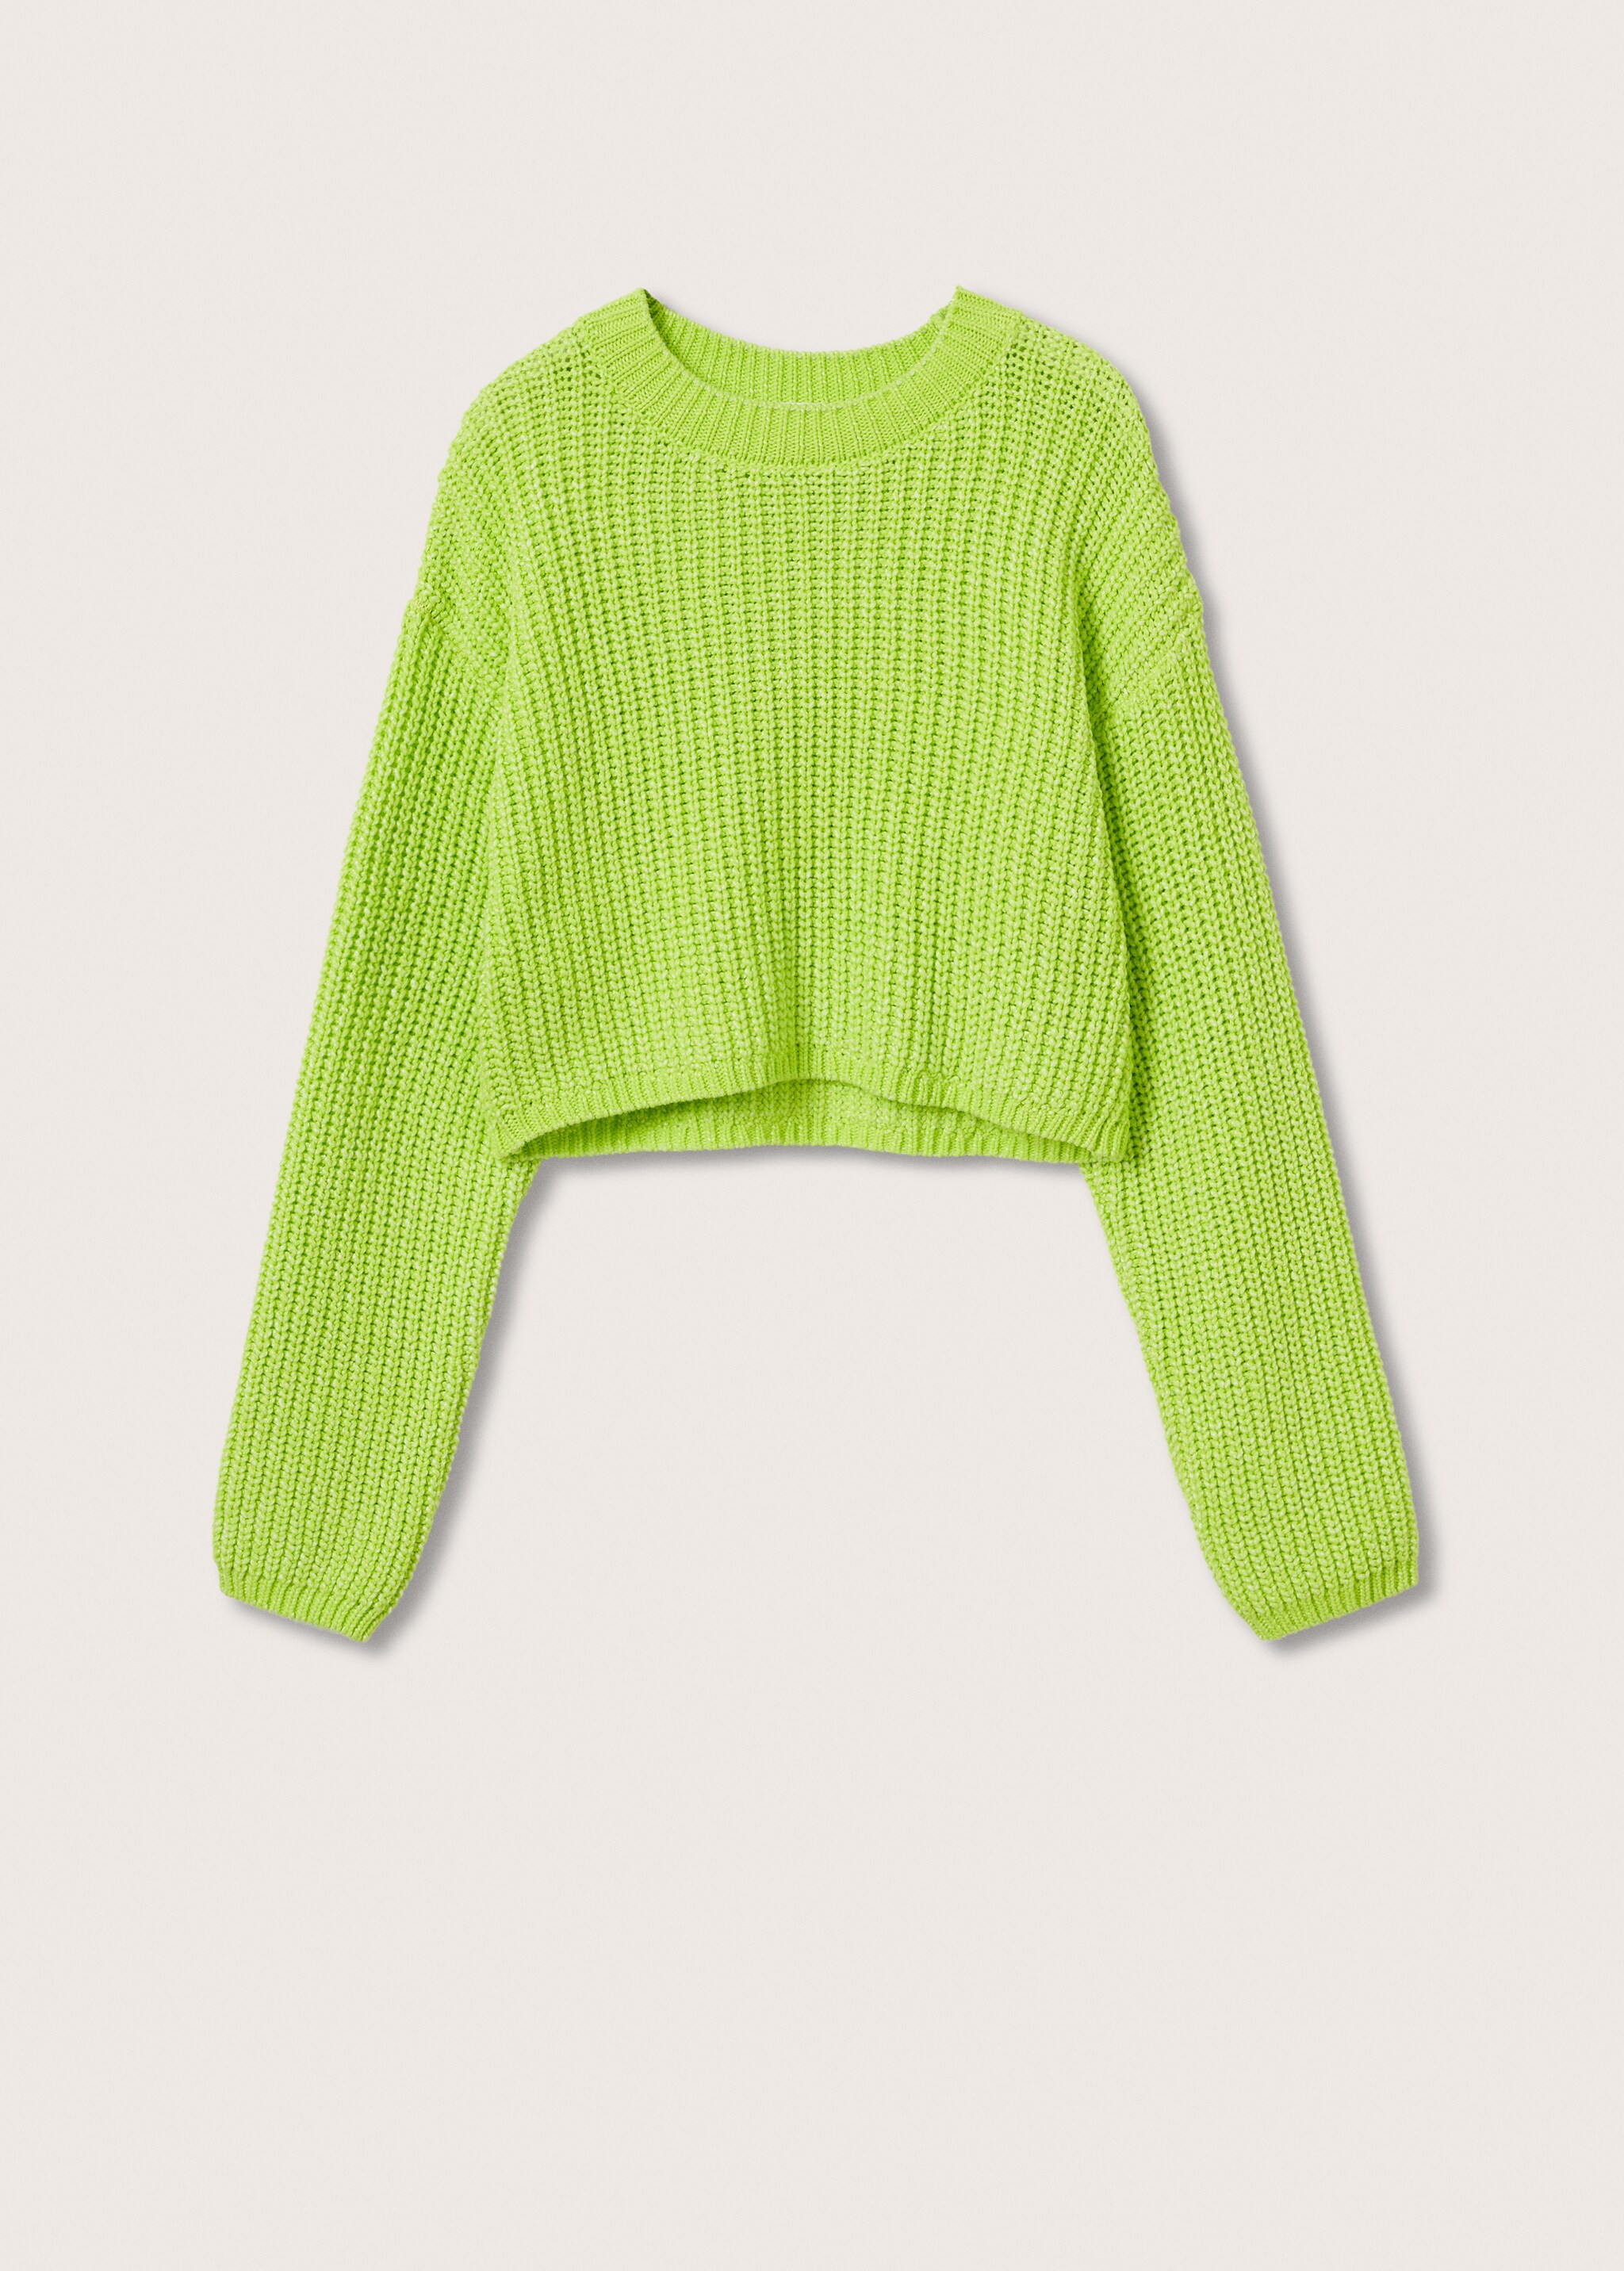 Knitted cropped sweater - Article without model